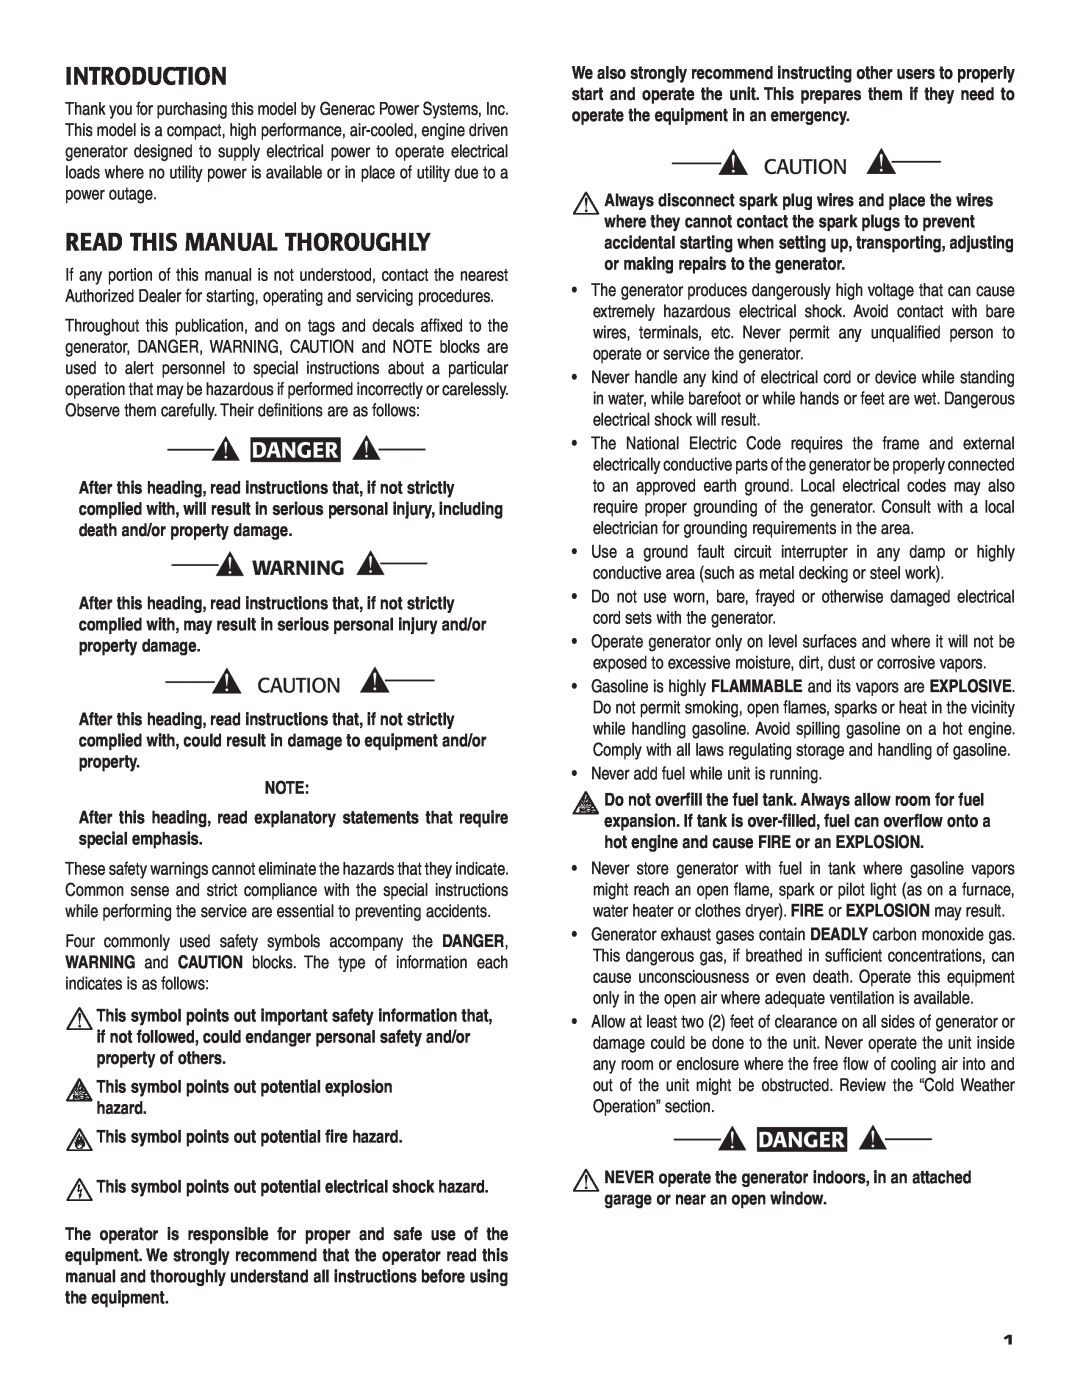 Guardian Technologies 004583-0 owner manual Introduction, Read This Manual Thoroughly, Danger 